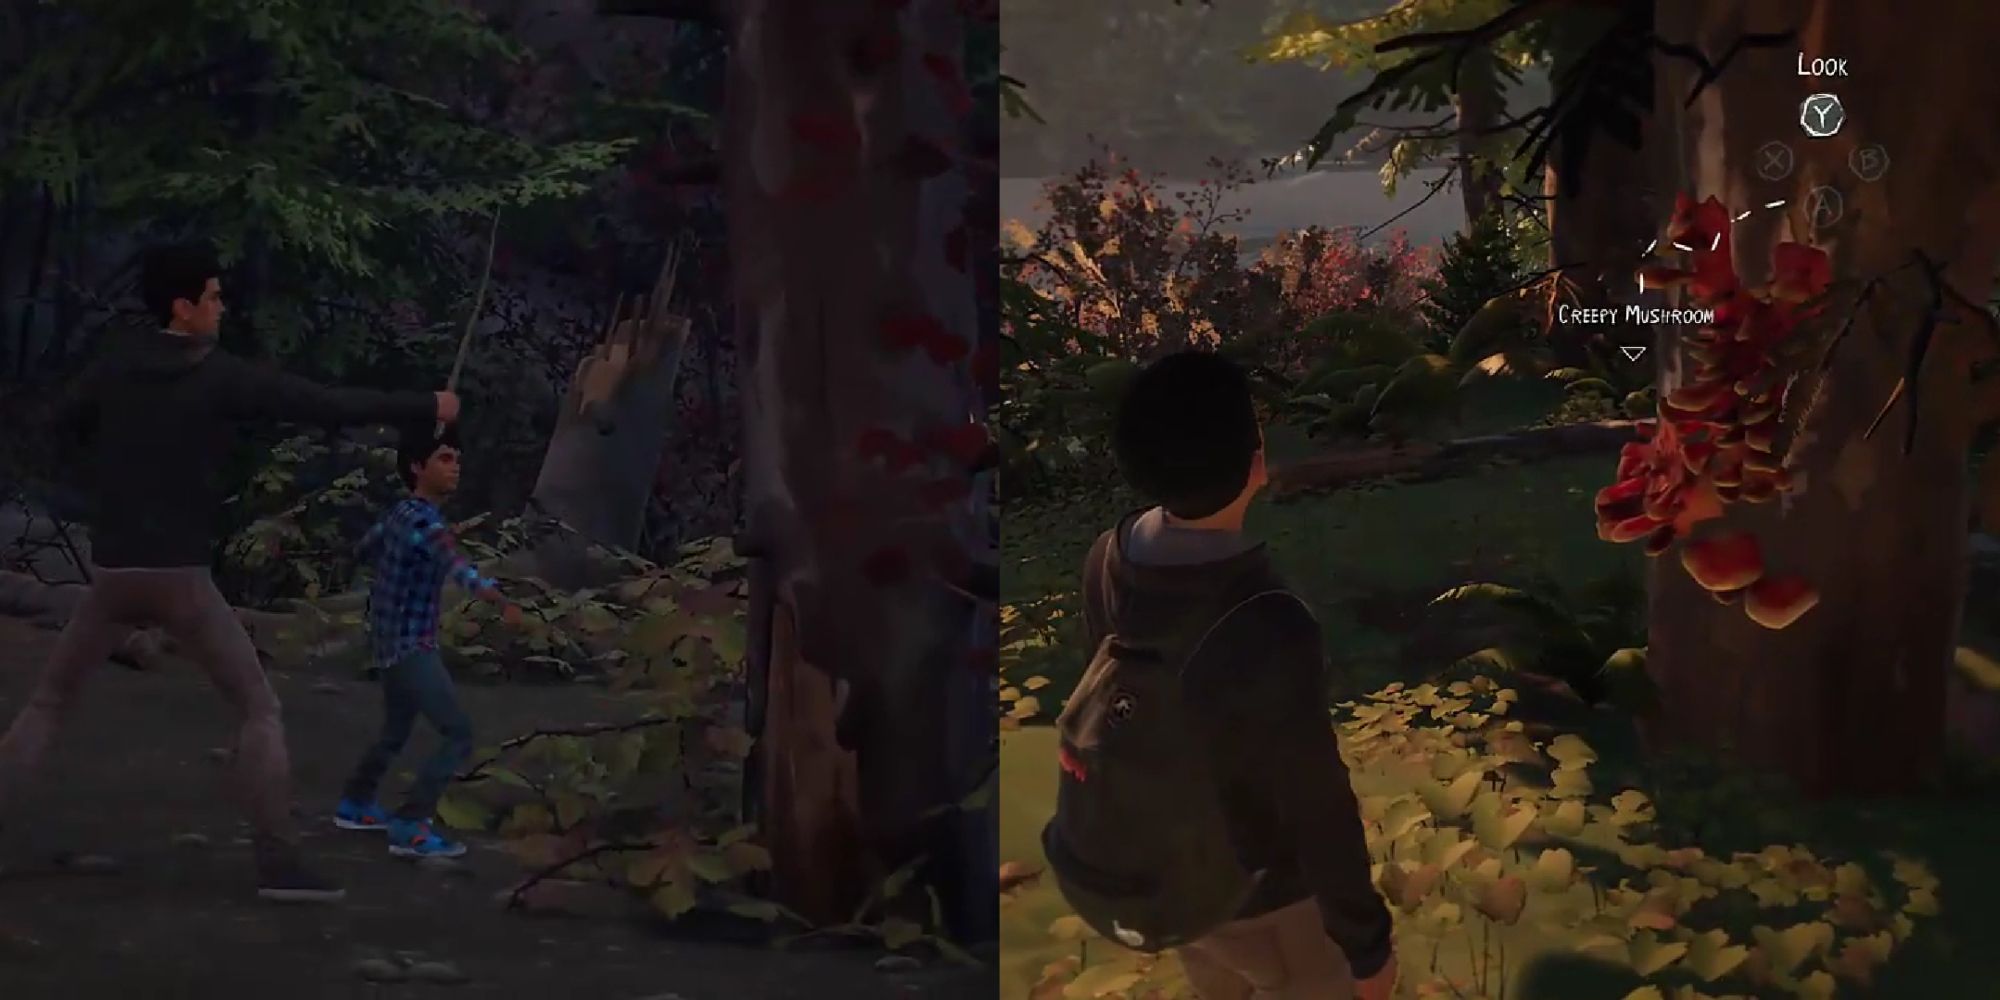 Two-image collage of Daniel and Sean fighting a tree with sticks, pretending its a horde of orcs, and Sean looking at the red mushrooms growing on the tree that resembles Clickers from The Last of Us in Life is Strange 2